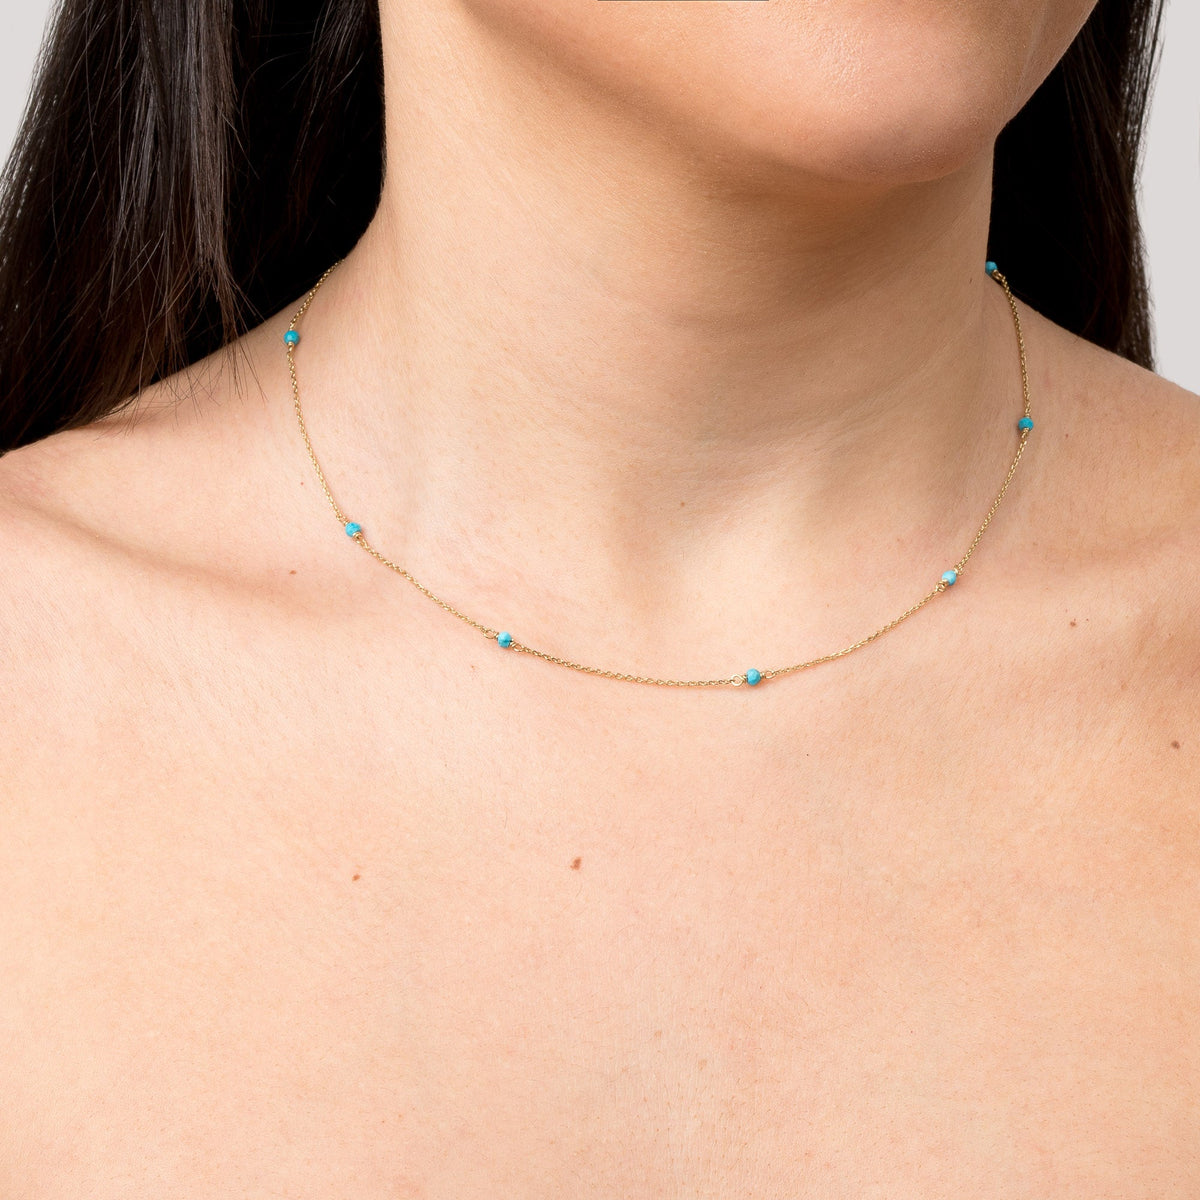 Endless Gemstone Station Necklace in Yellow, Rose or White Gold